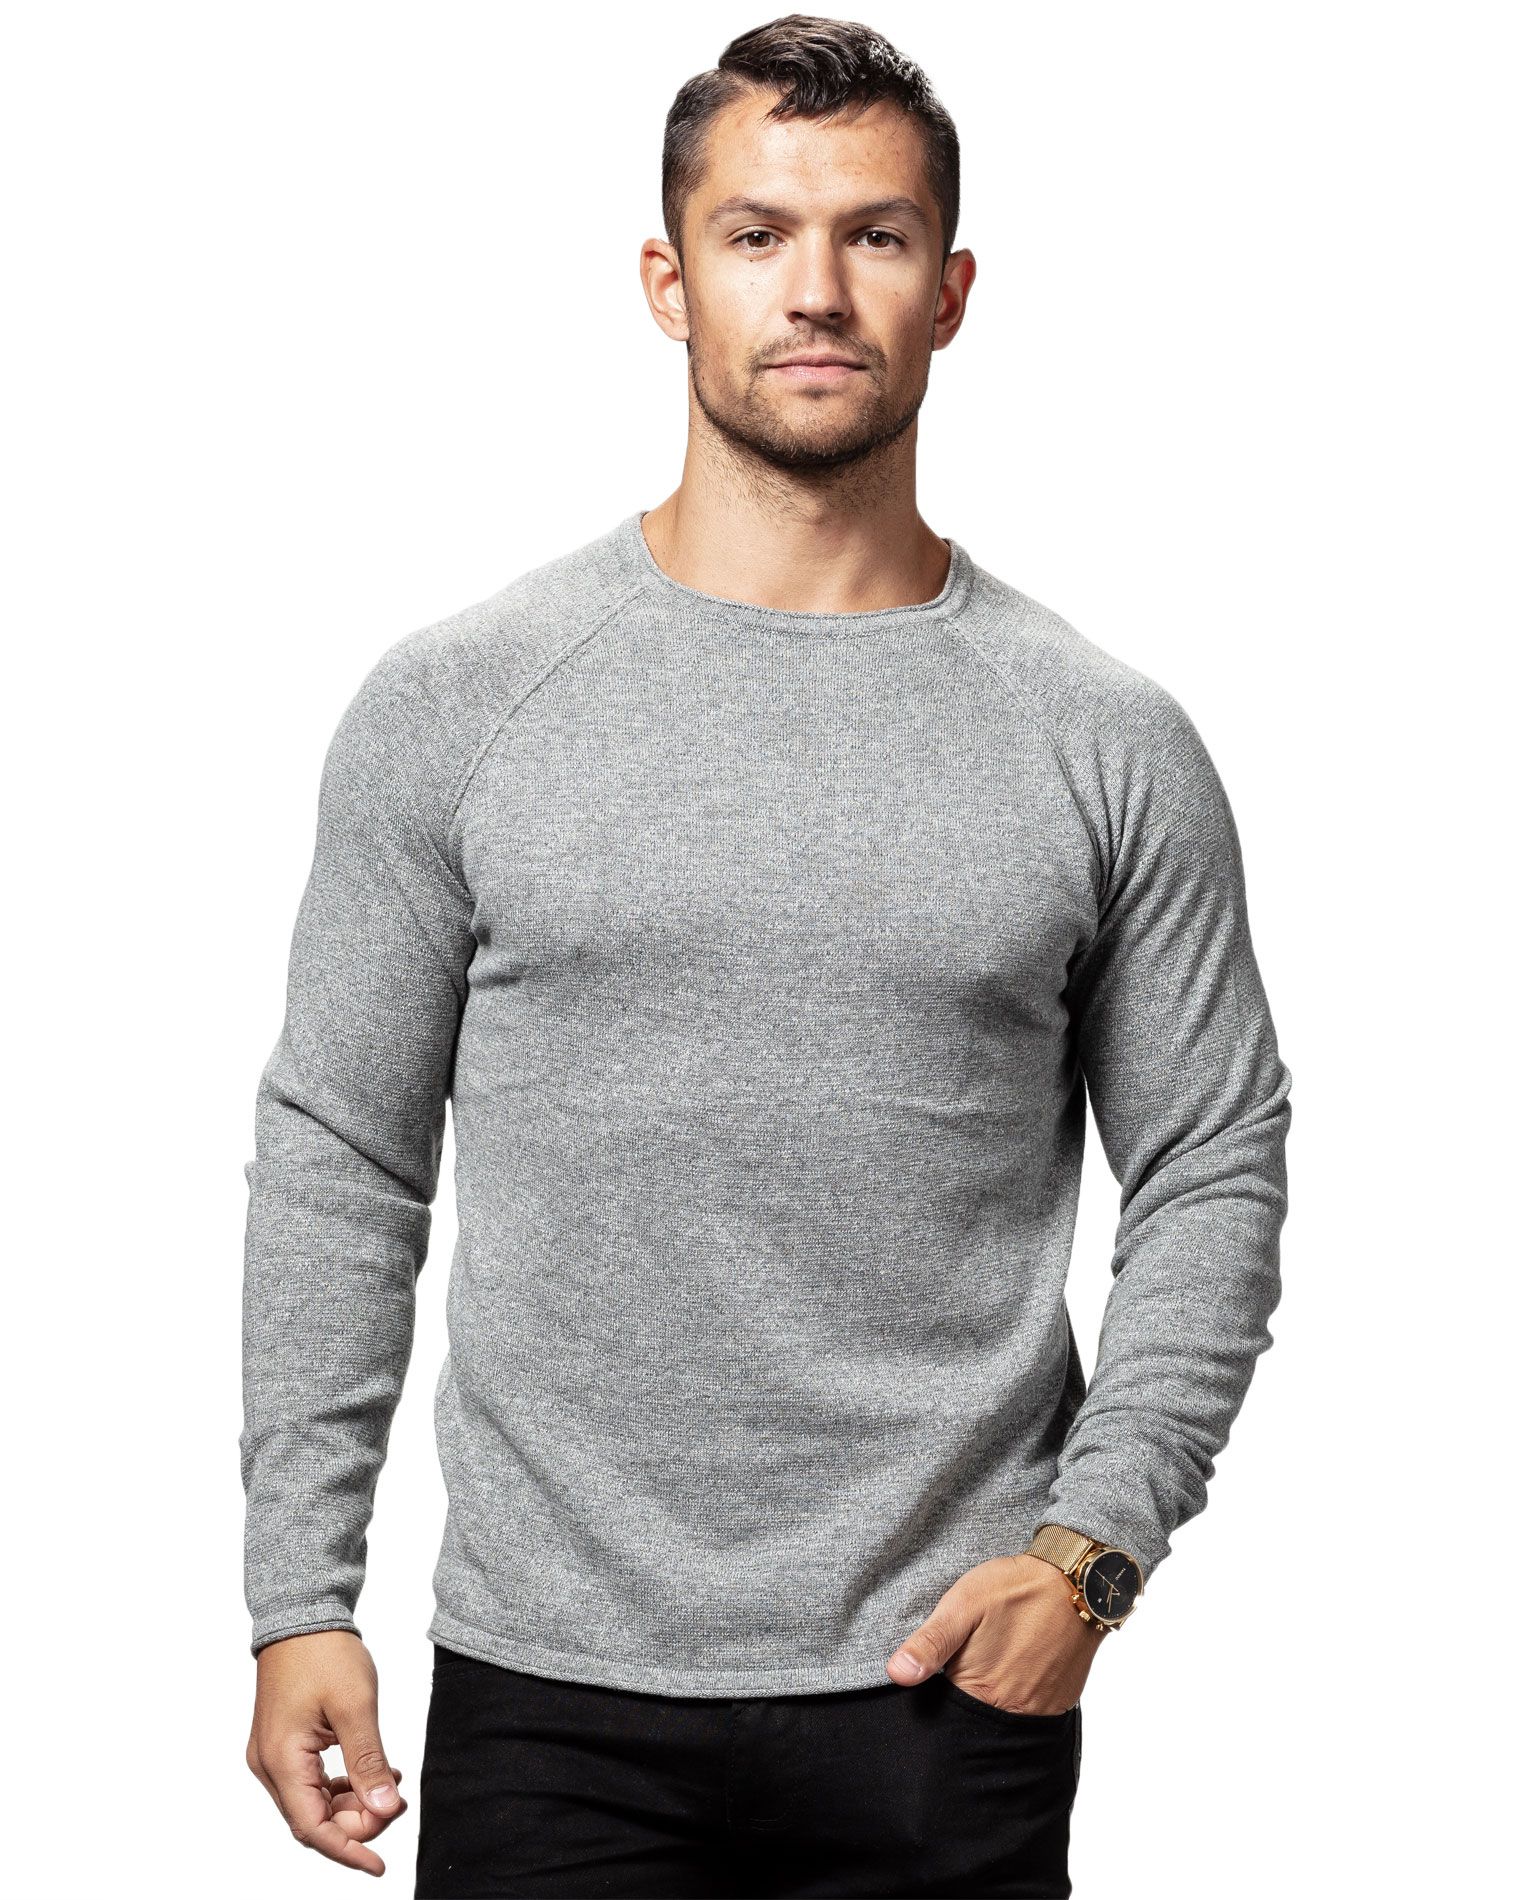 Alexo Crew Knit Griffin Gray Only & Sons - 8845 - Long Sleeves - Jerone.com